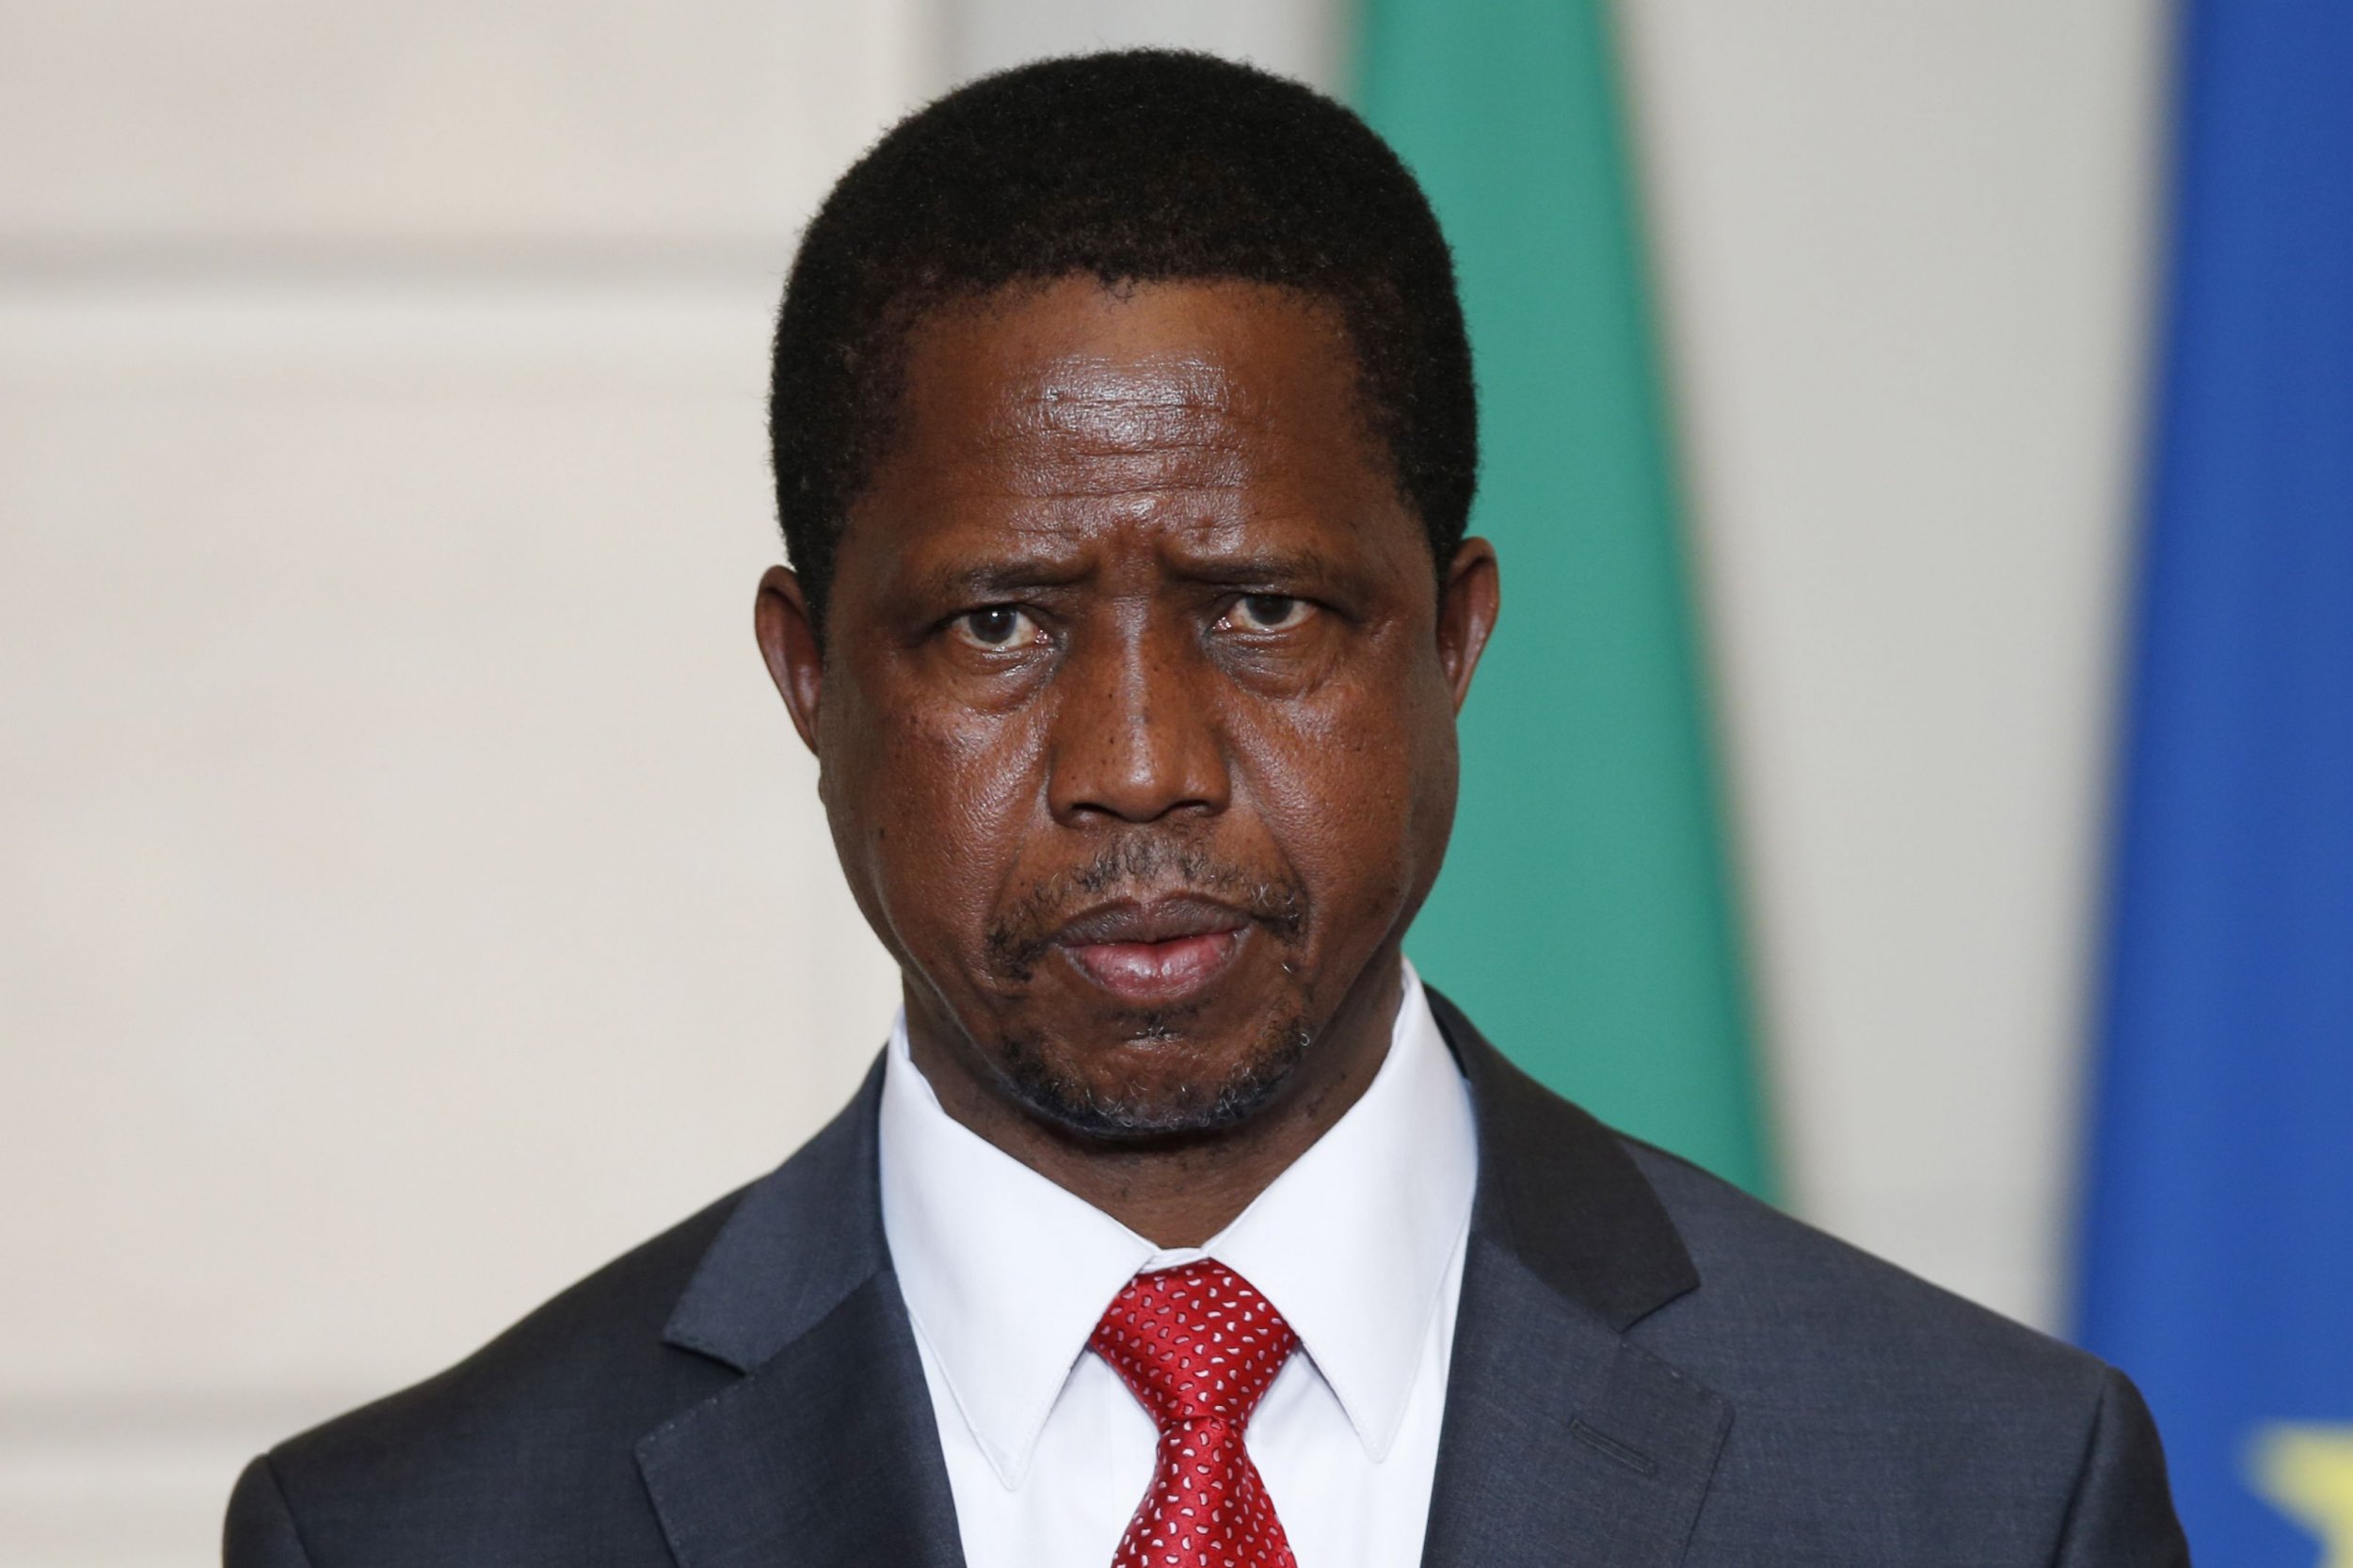 Zambian President Edgar Lungu pictured at the Elysee Palace in Paris.